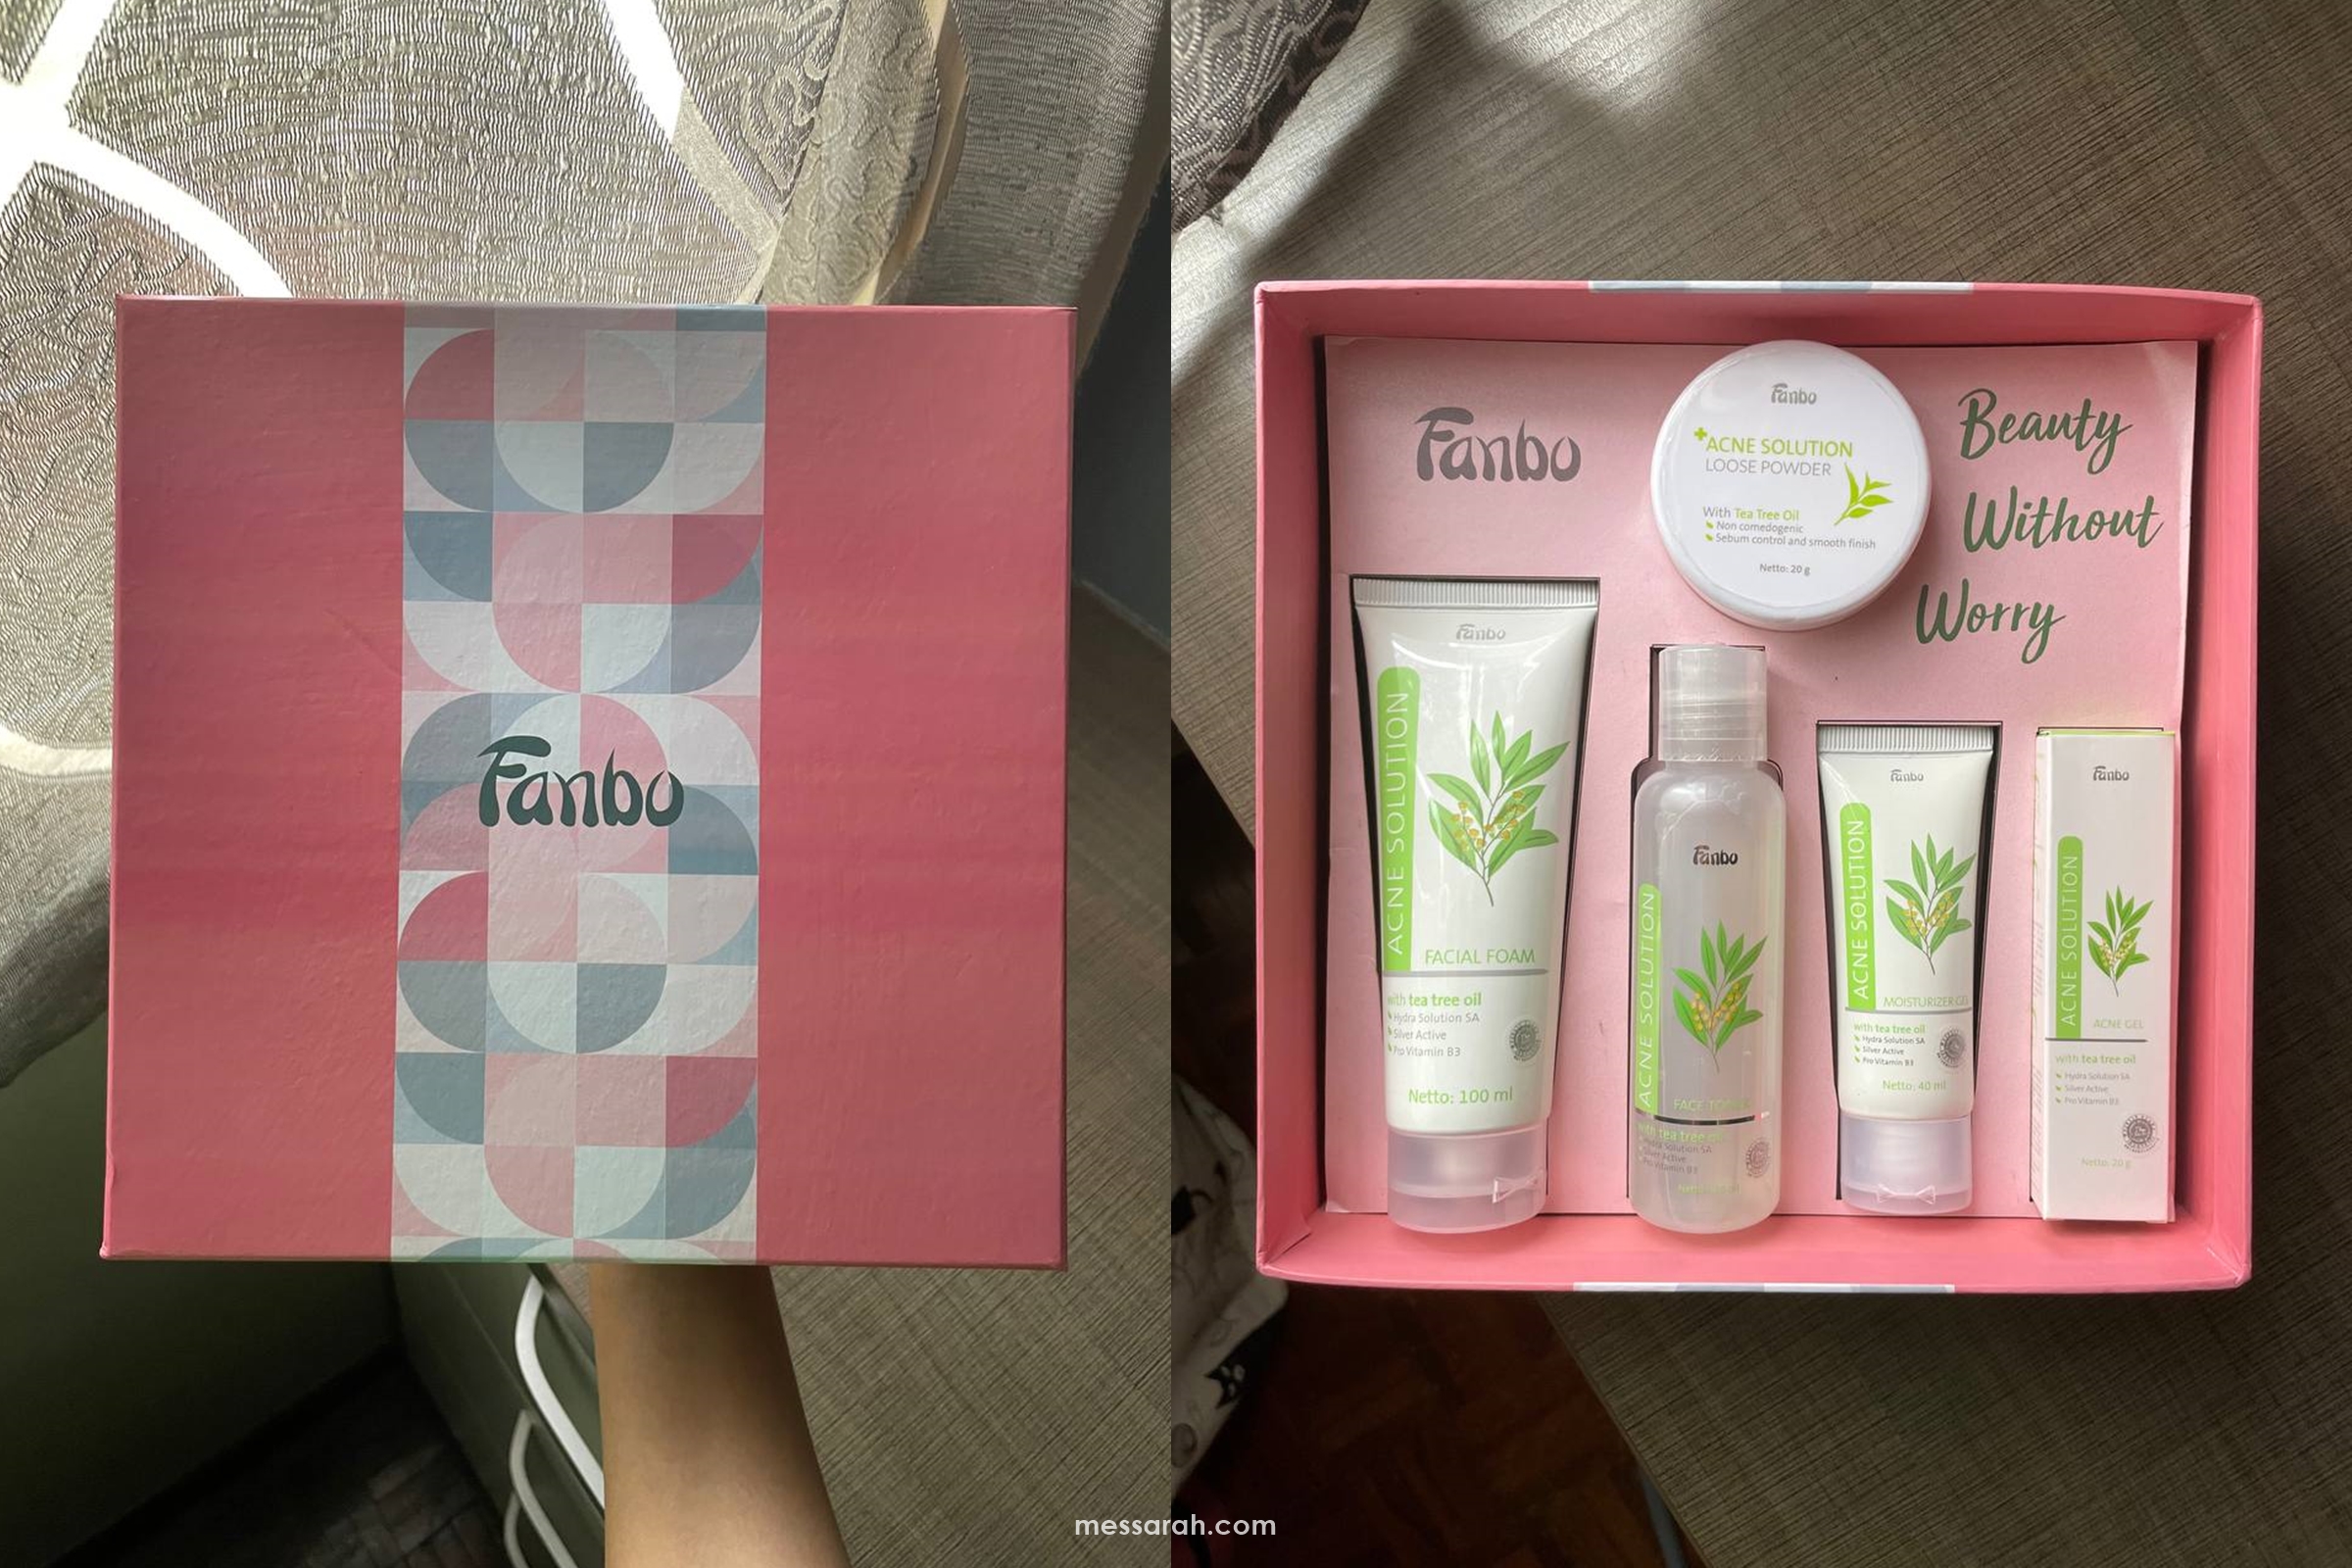 Fanbo Acne Solution Kit Review